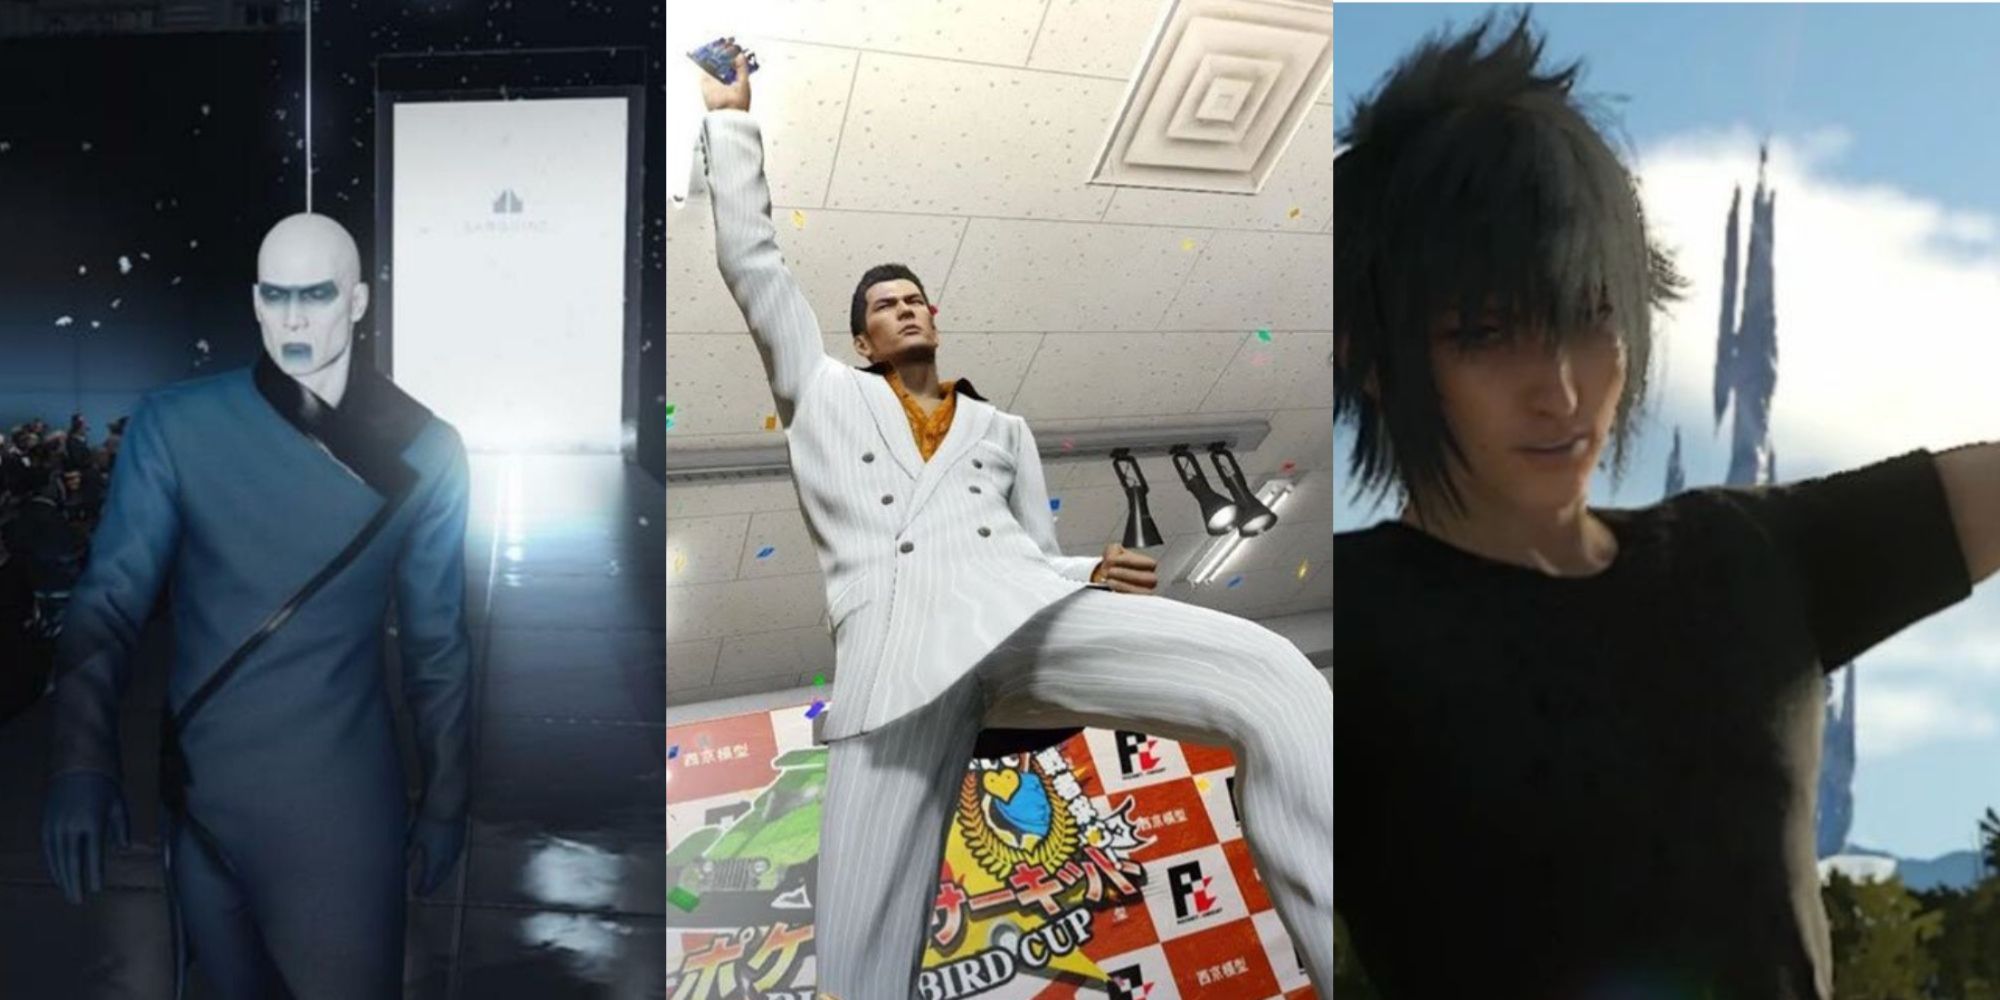 Agent 47 dressed as Helmut Kruger on the runway, Kiryu holding up his RC racecar, and Noctis smiling, left to right